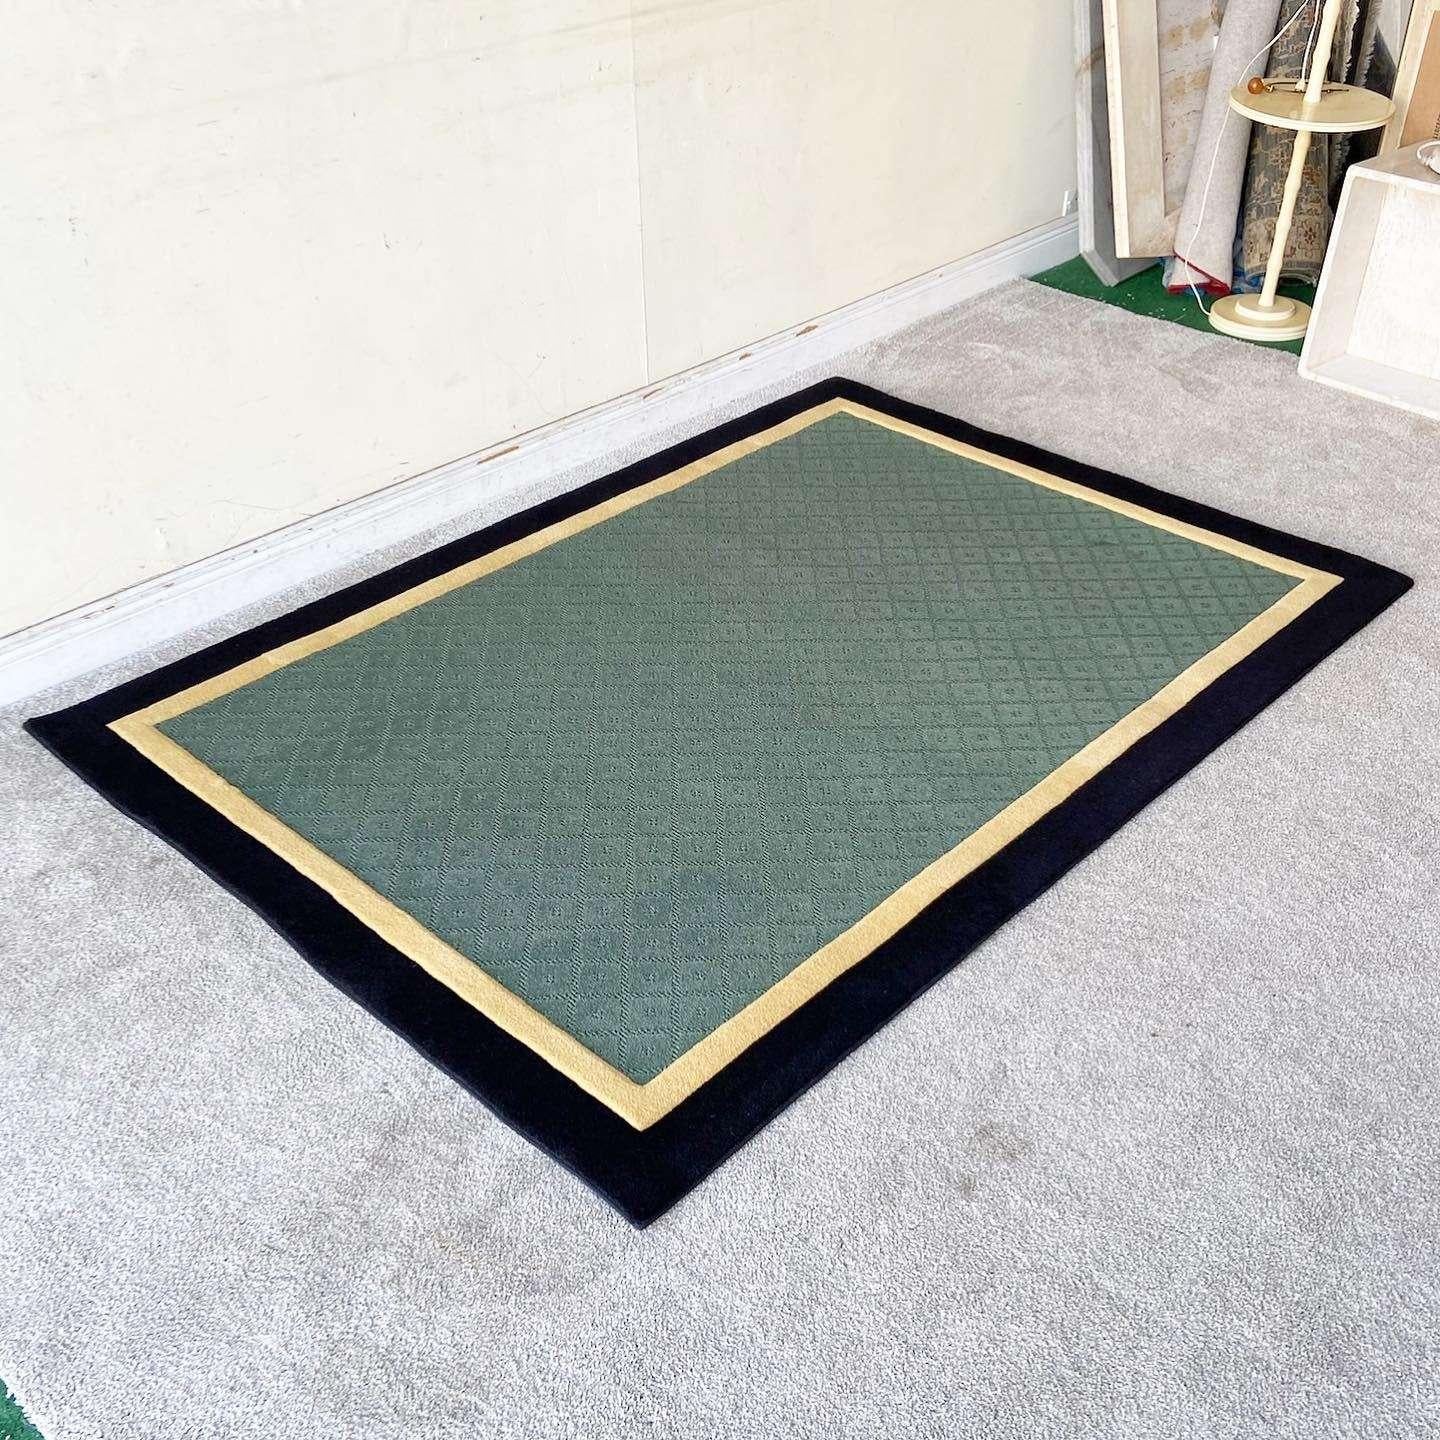 Amazing vintage postmodern rectangular area rug. Features a dark hunter green center border by a tan and and black section.

Rug 2
